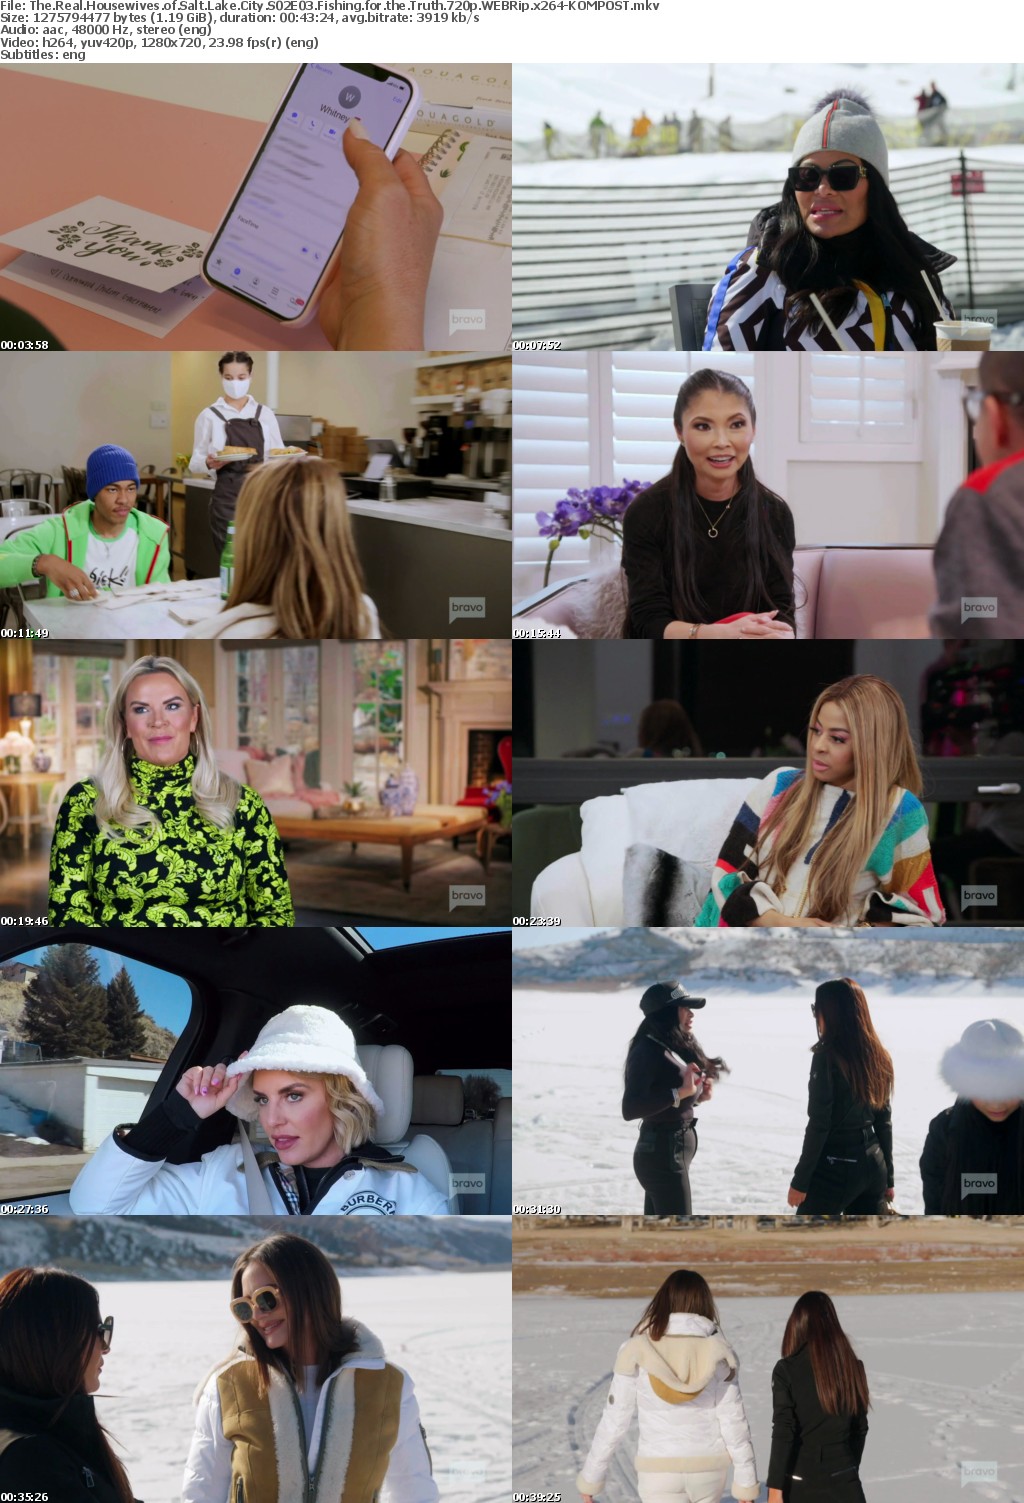 The Real Housewives of Salt Lake City S02E03 Fishing for the Truth 720p WEBRip x264-KOMPOST